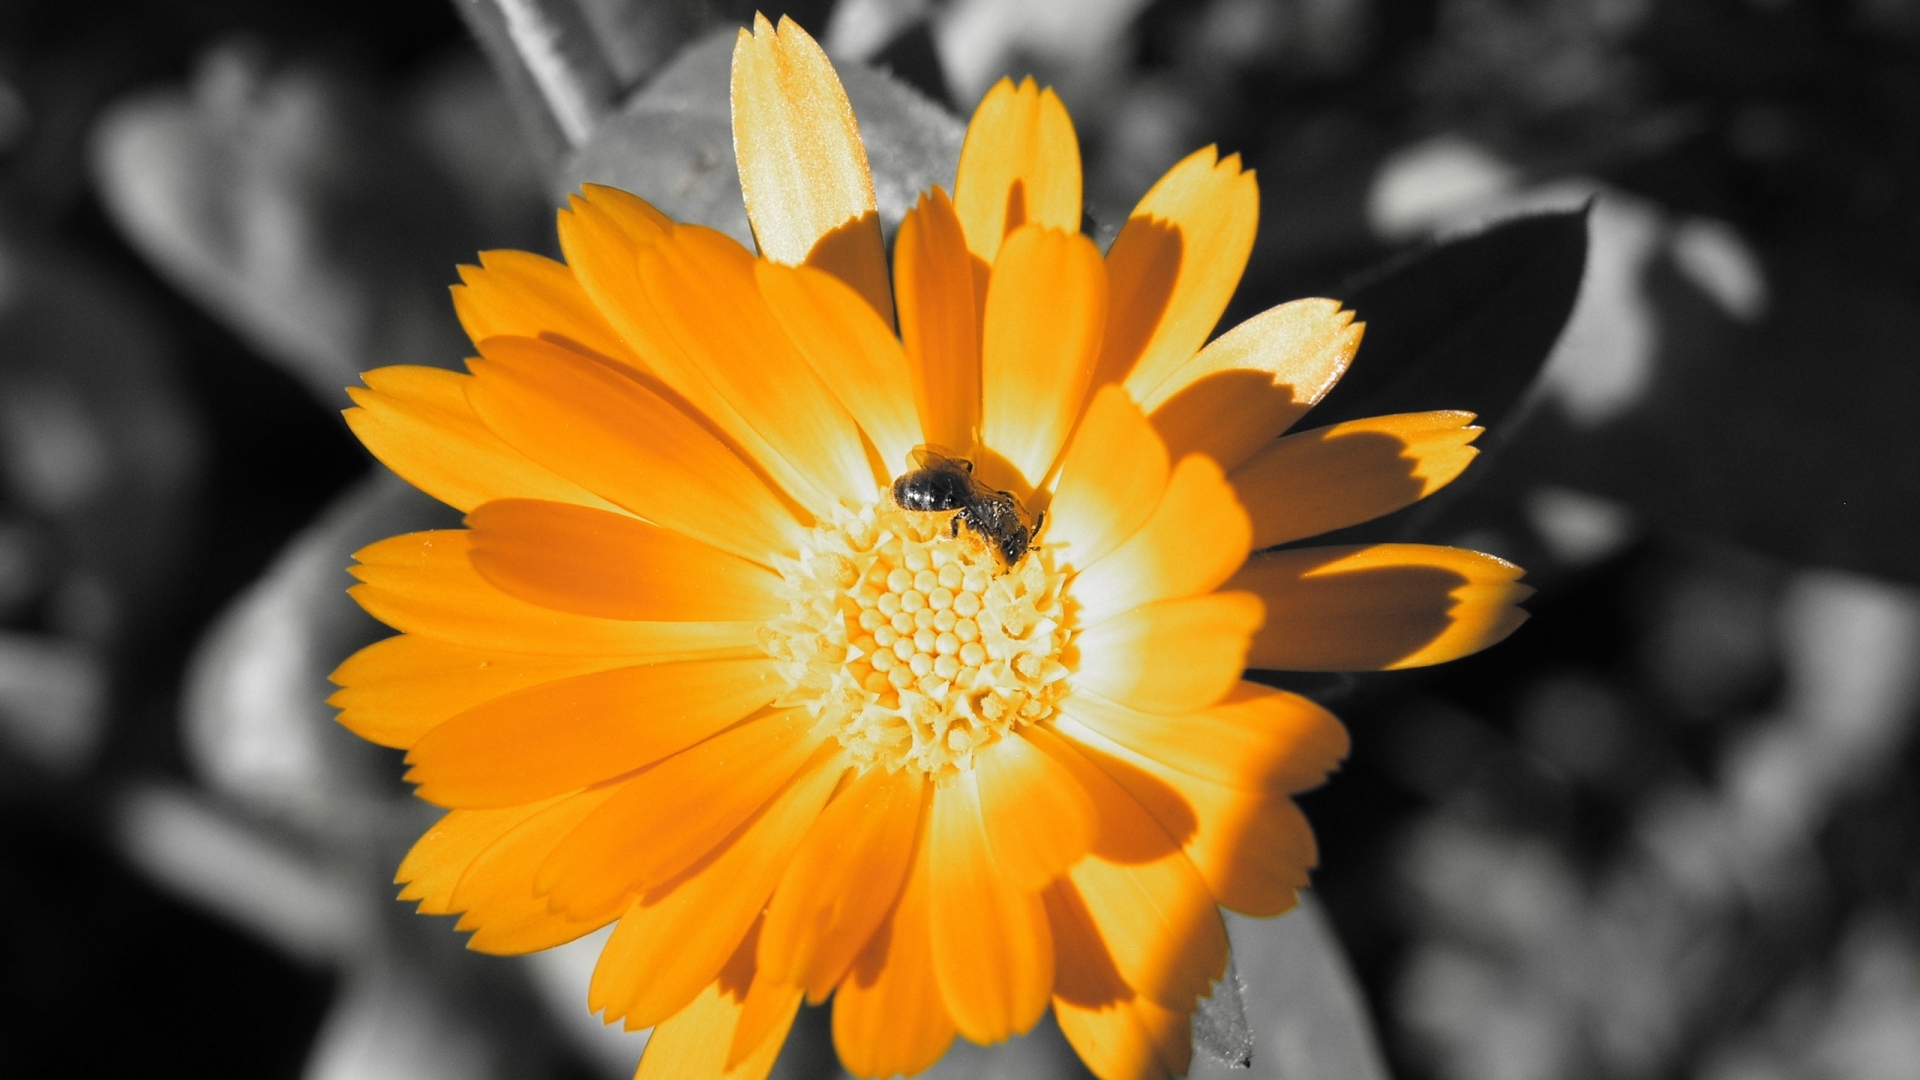 flowers, insects, bees, yellow Image for desktop